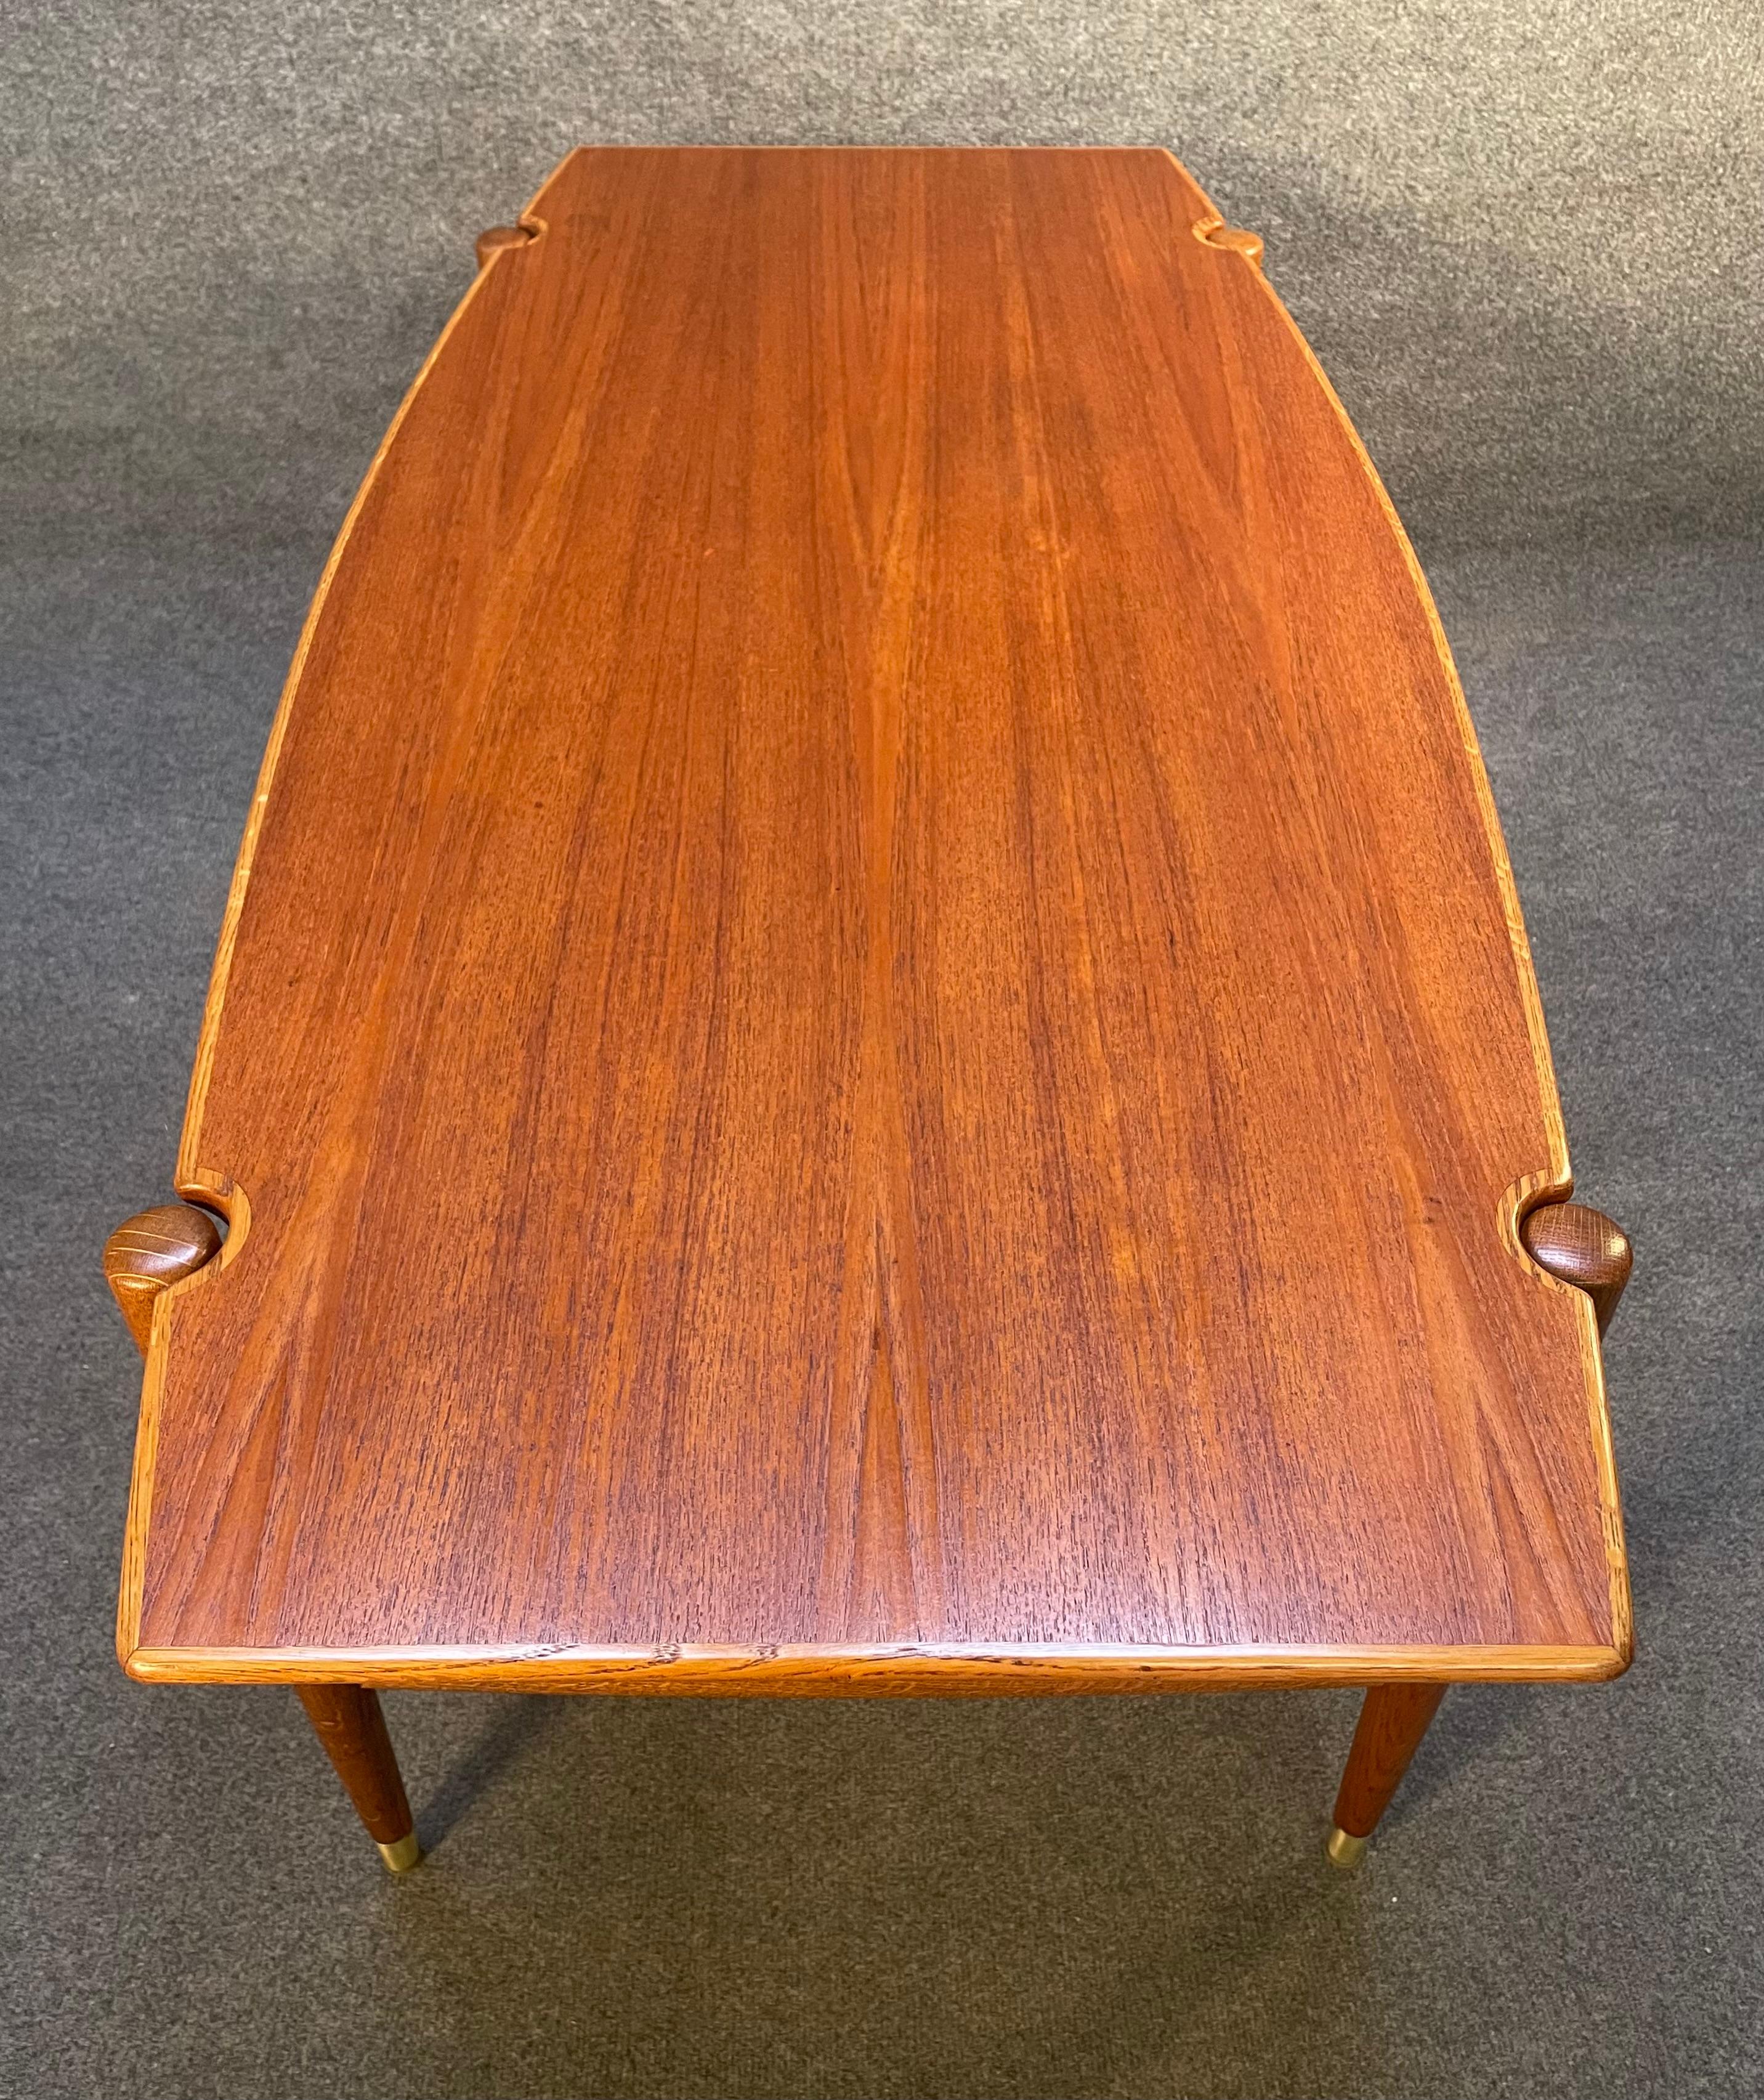 Vintage Danish Mid-Century Modern Teak and Oak Coffee Table by Folke Ohlsson In Good Condition For Sale In San Marcos, CA